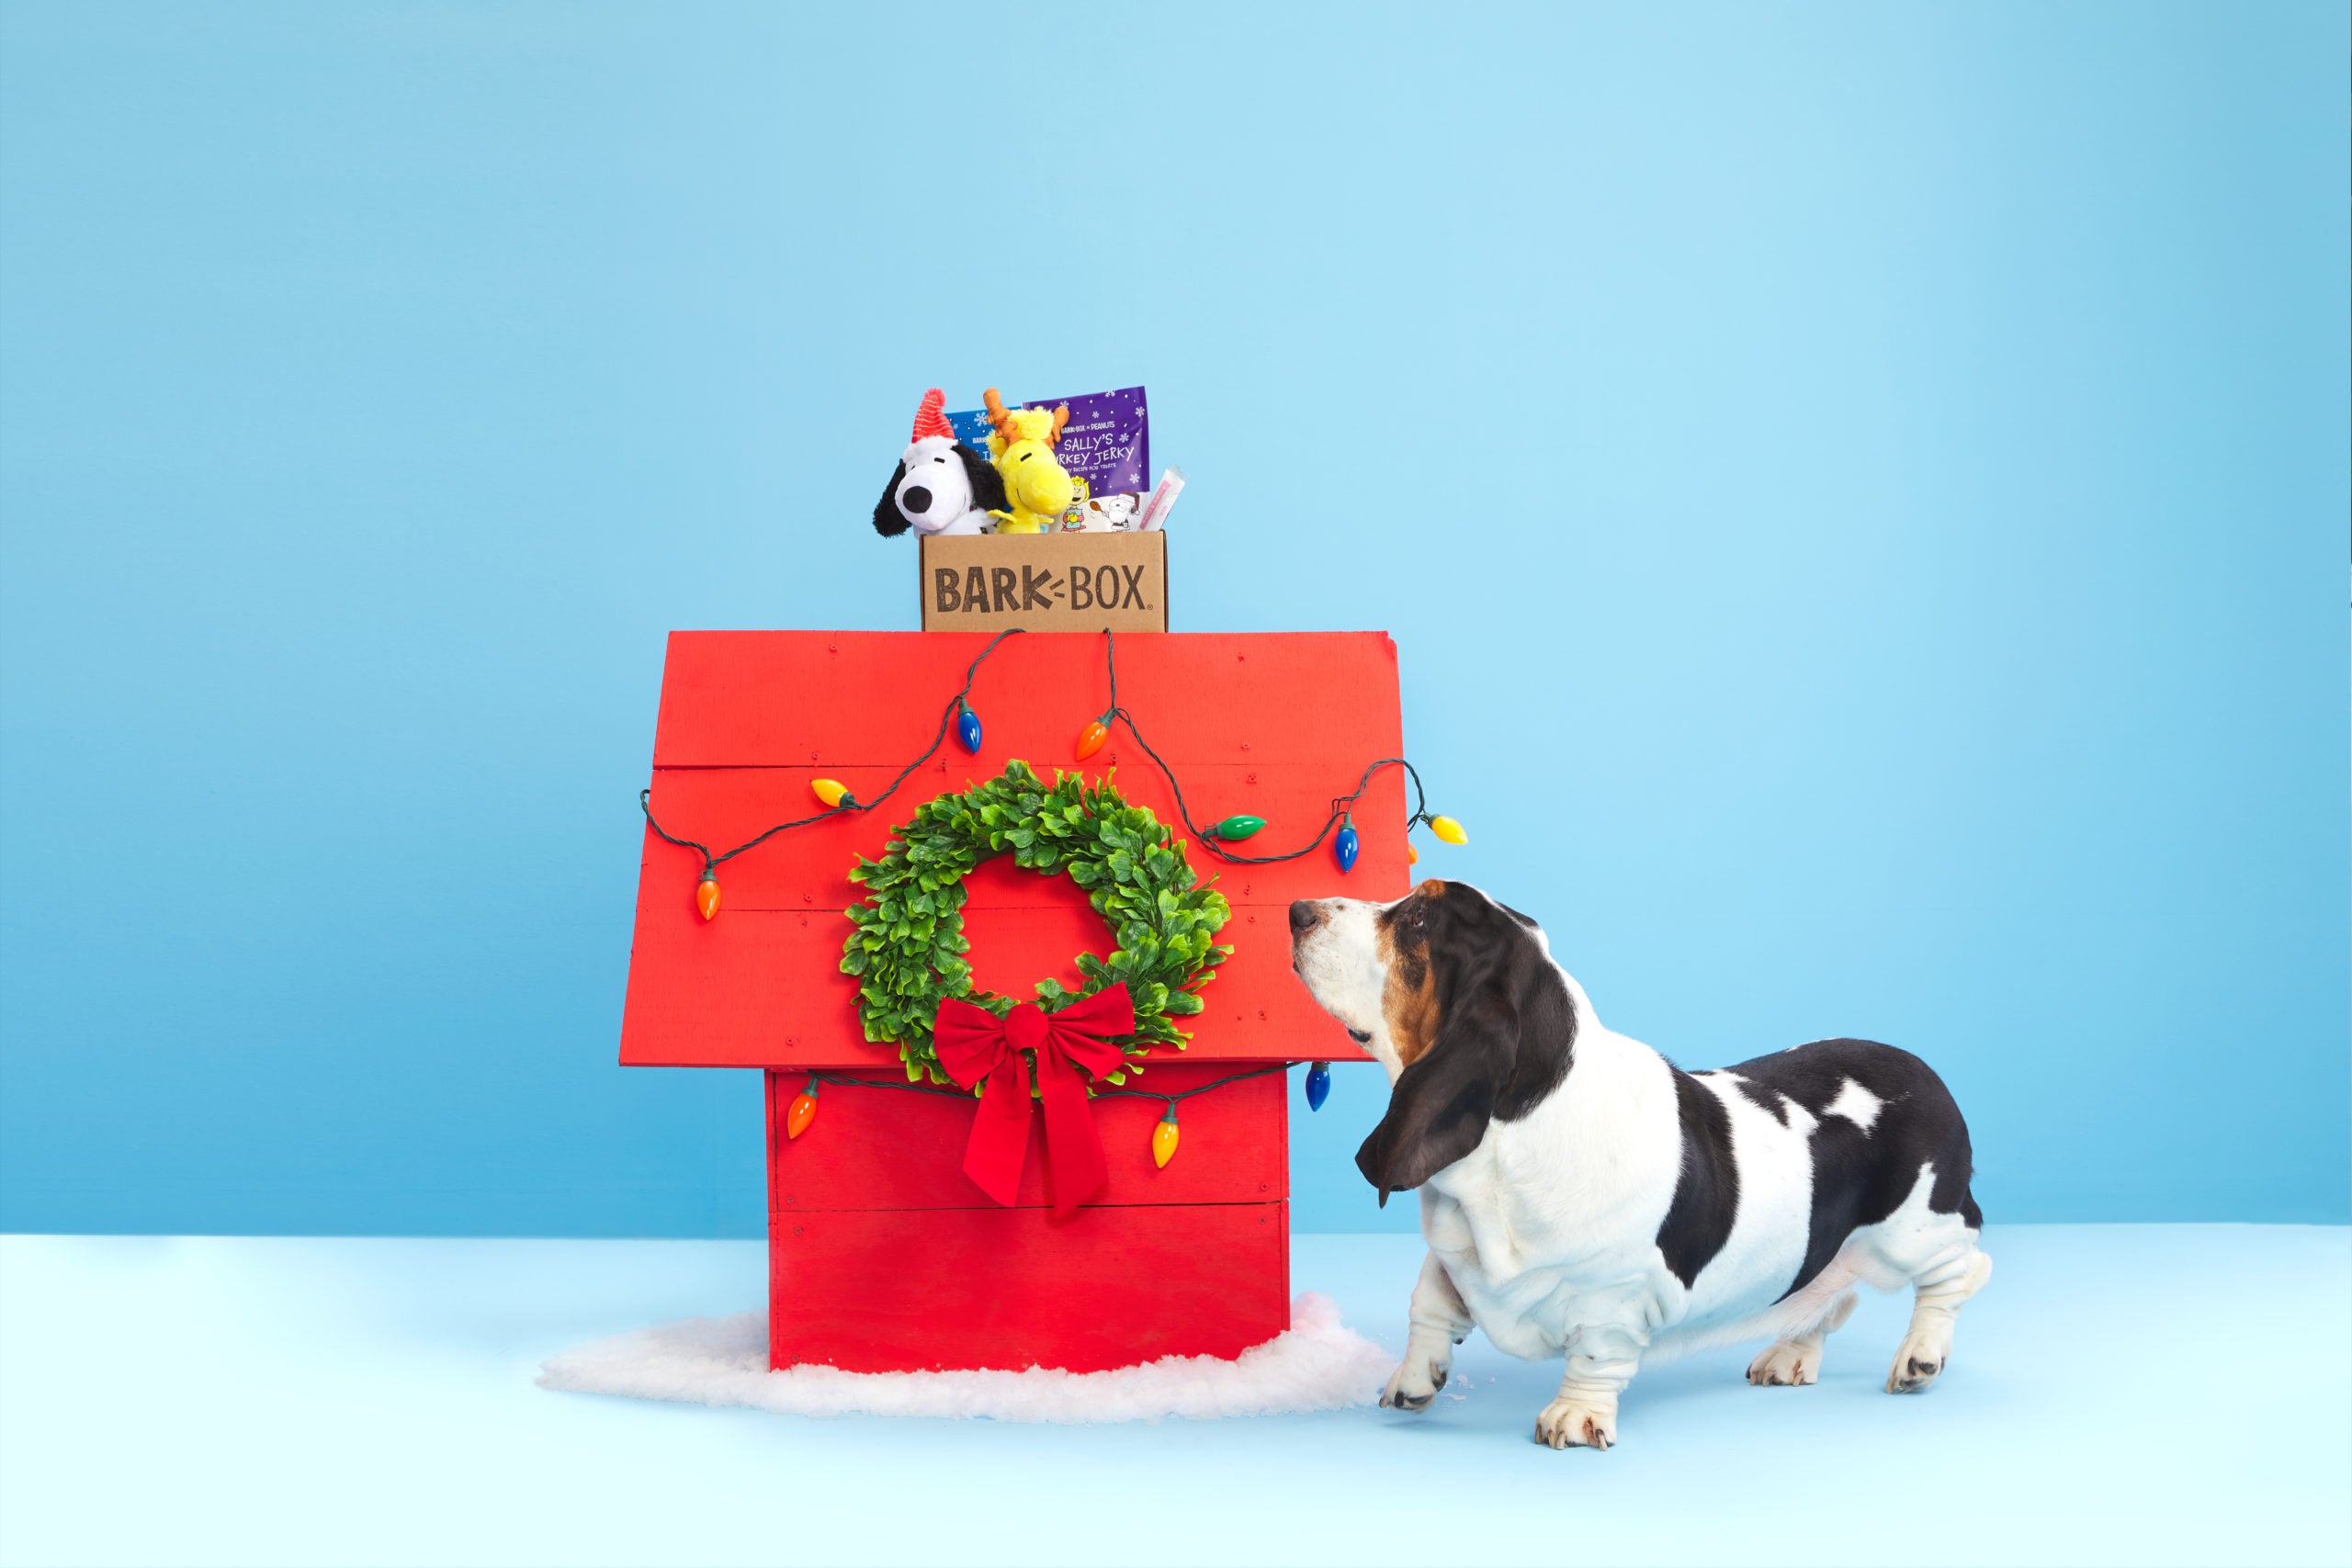 Lights, Please: BARK, Company Behind BarkBox, Launches Peanuts-Themed Subscription Box for December